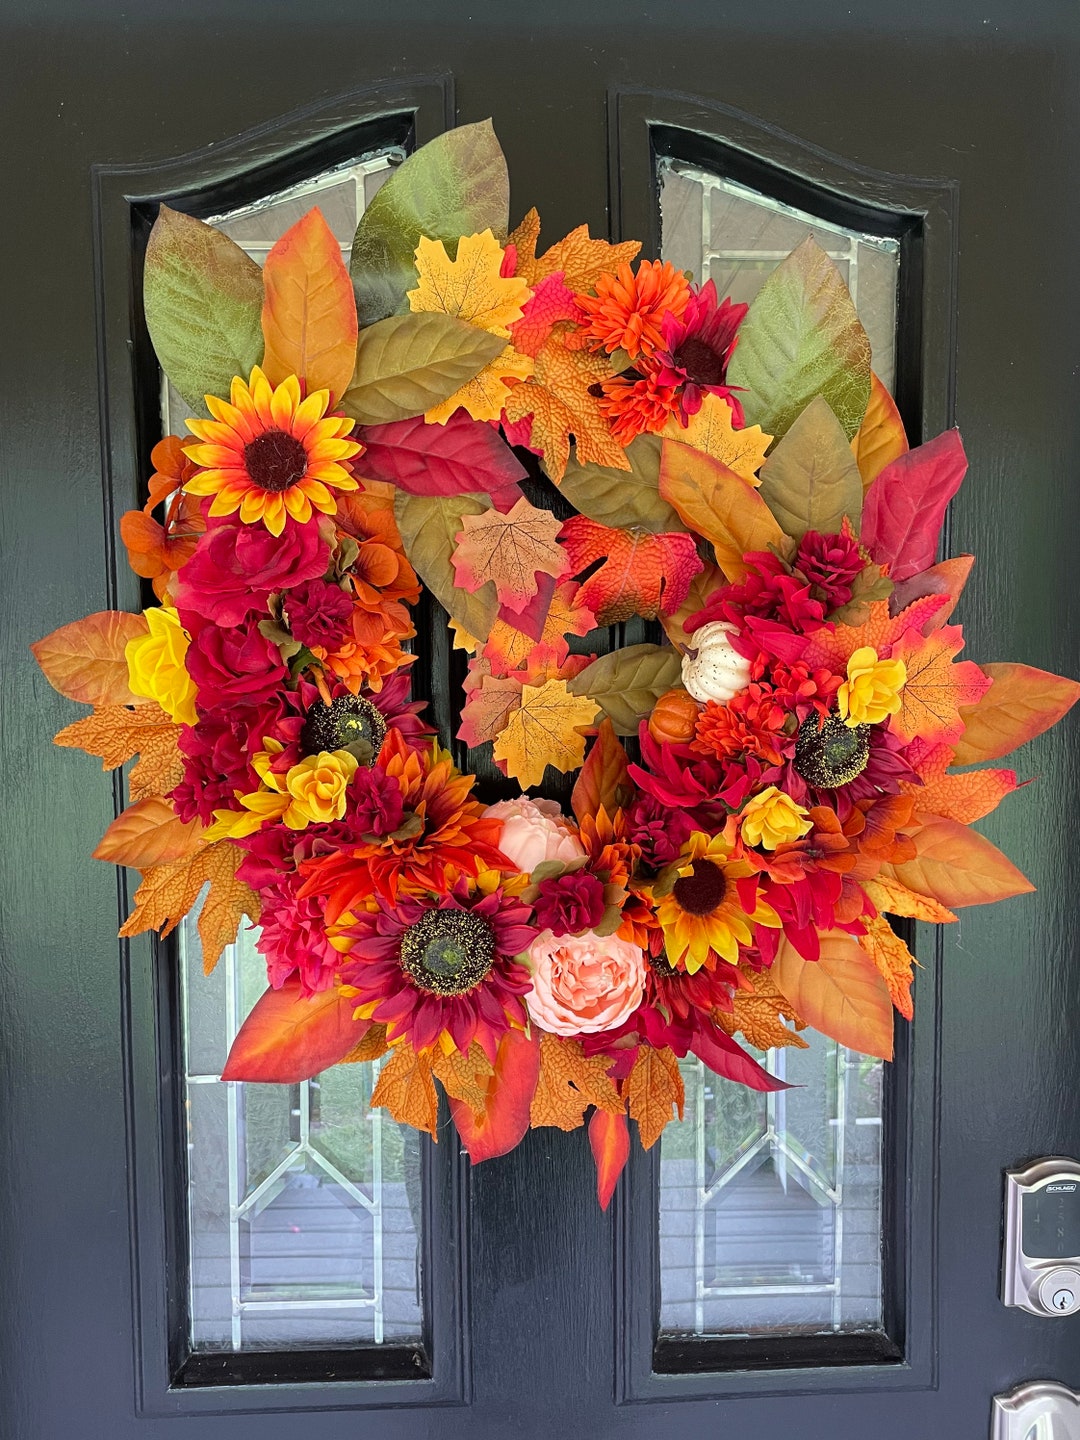 40+ DIY Fall Wreaths Perfect For Decorating Your Front Door